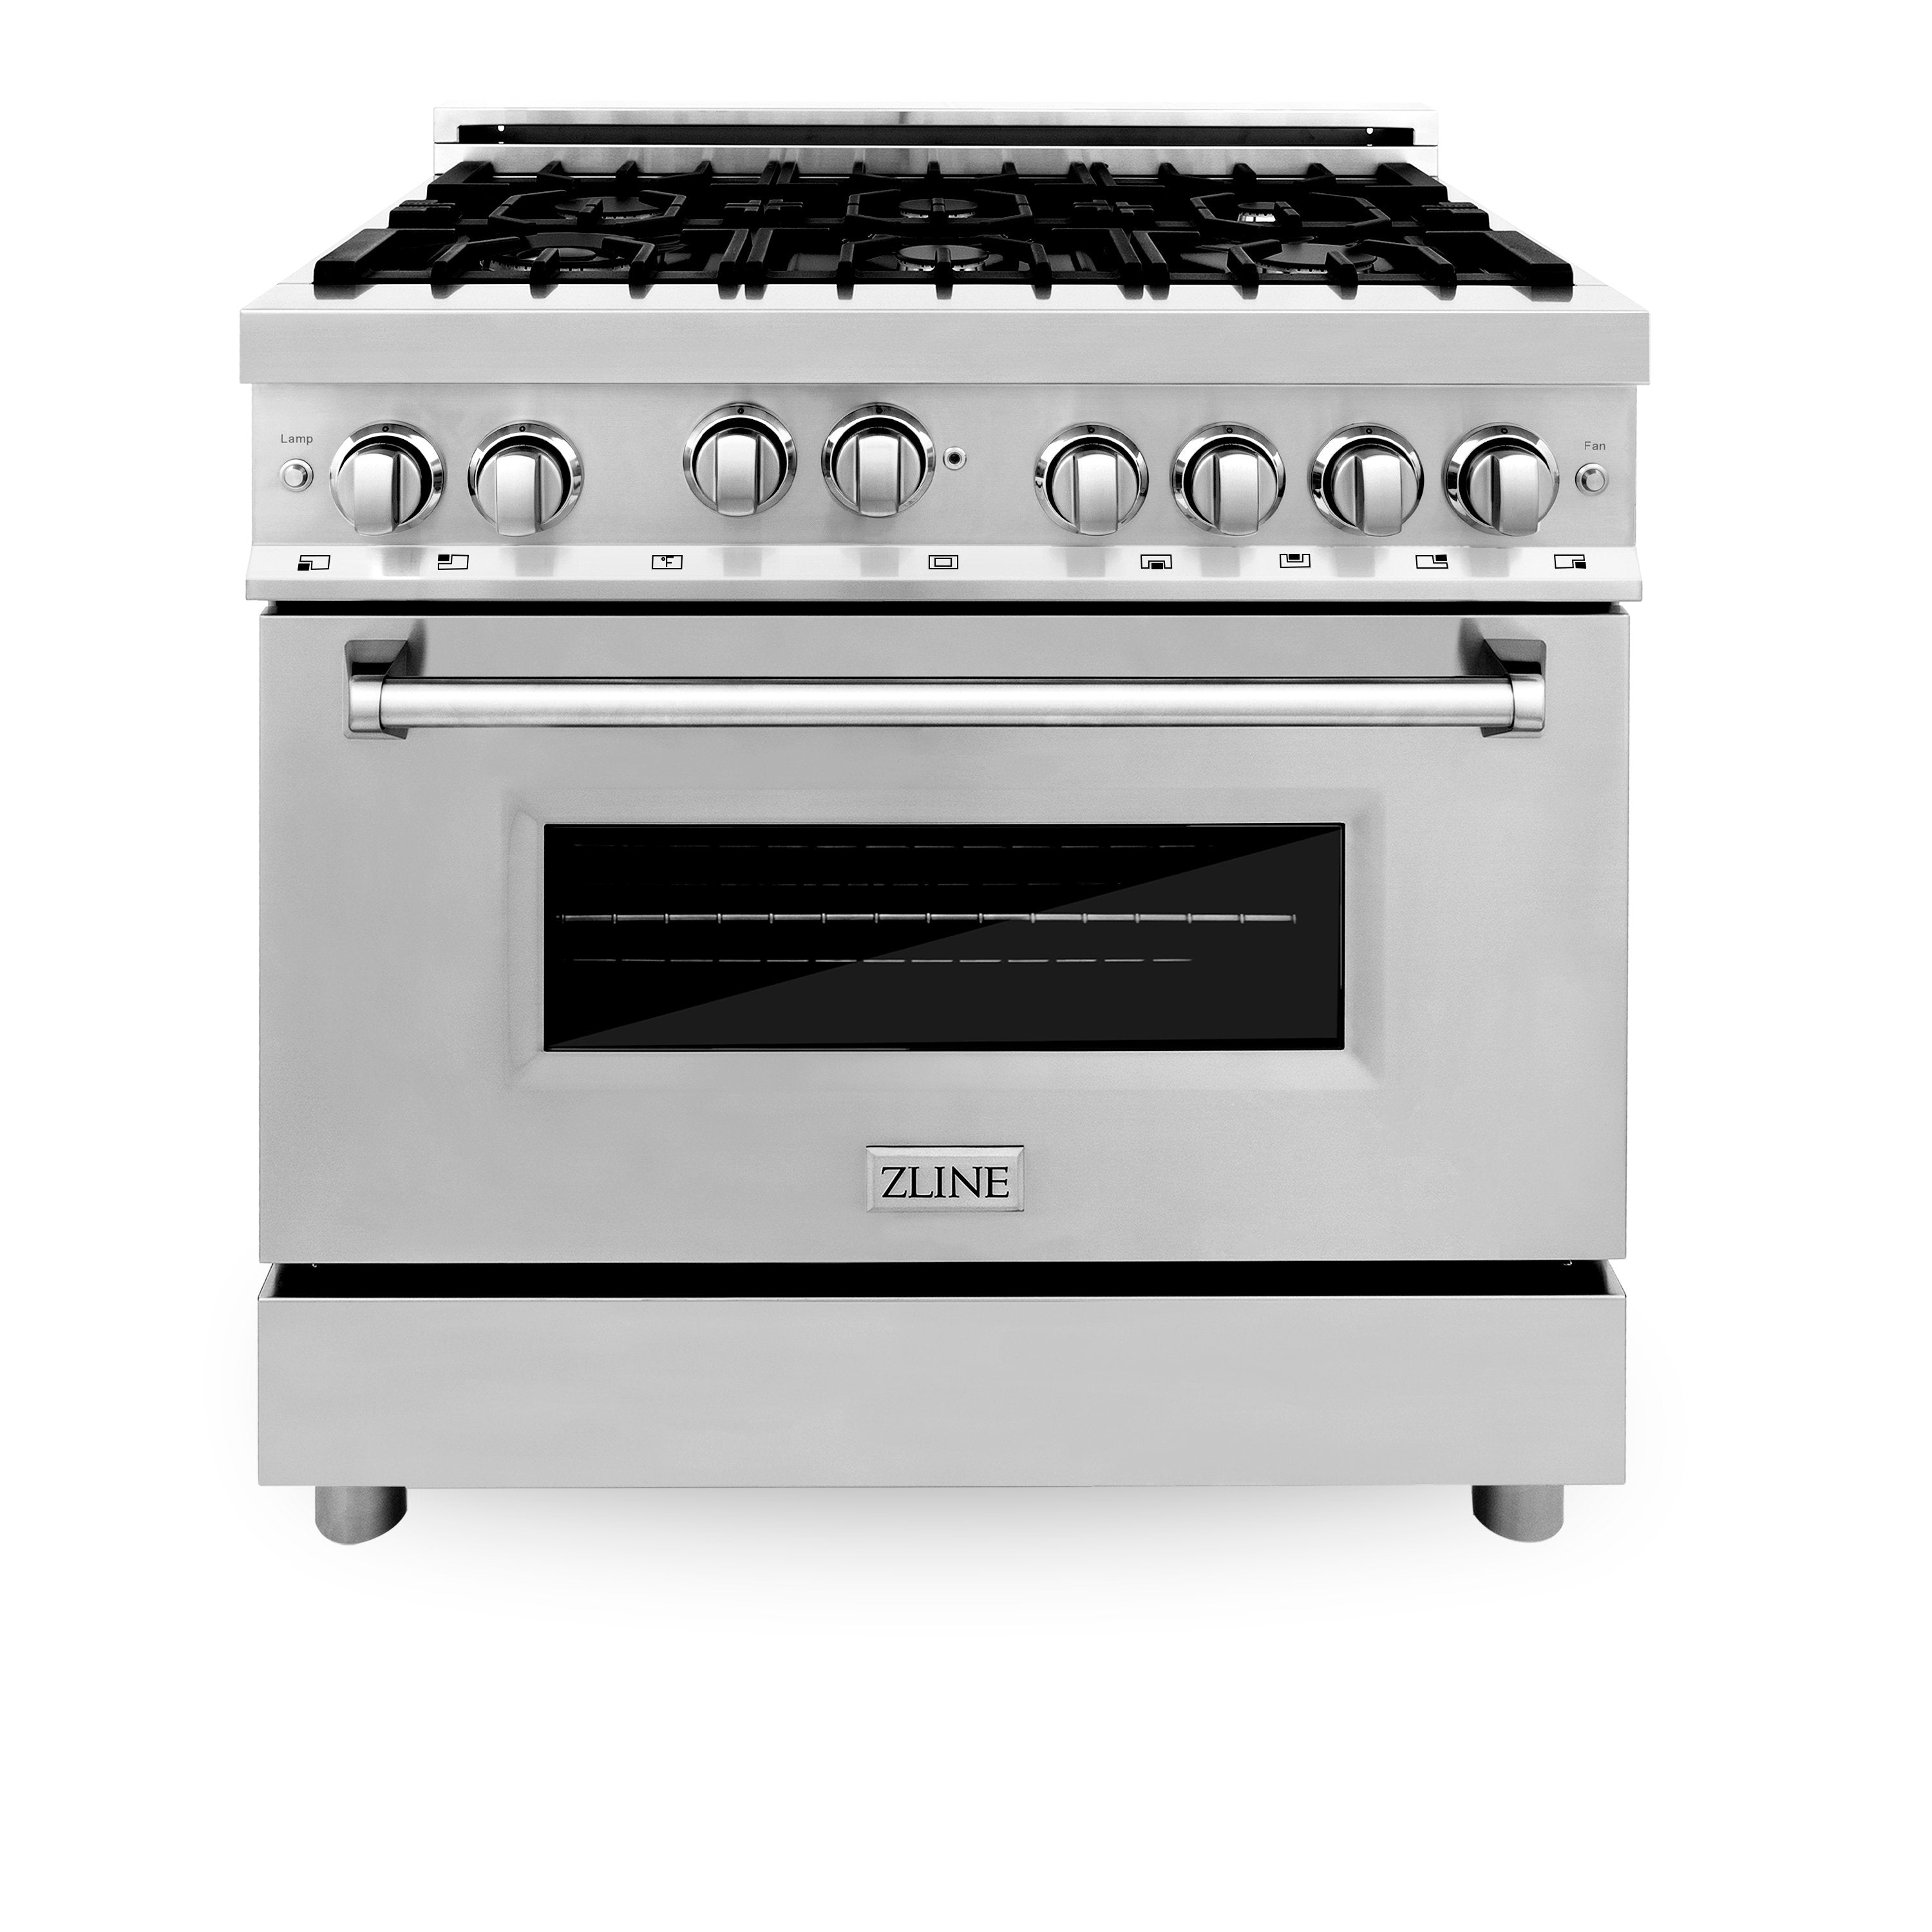 ZLINE Kitchen and Bath, ZLINE 36" Professional 4.6 cu. ft. 6 Gas on Gas Range in Stainless Steel with Color Door Options, RG36,